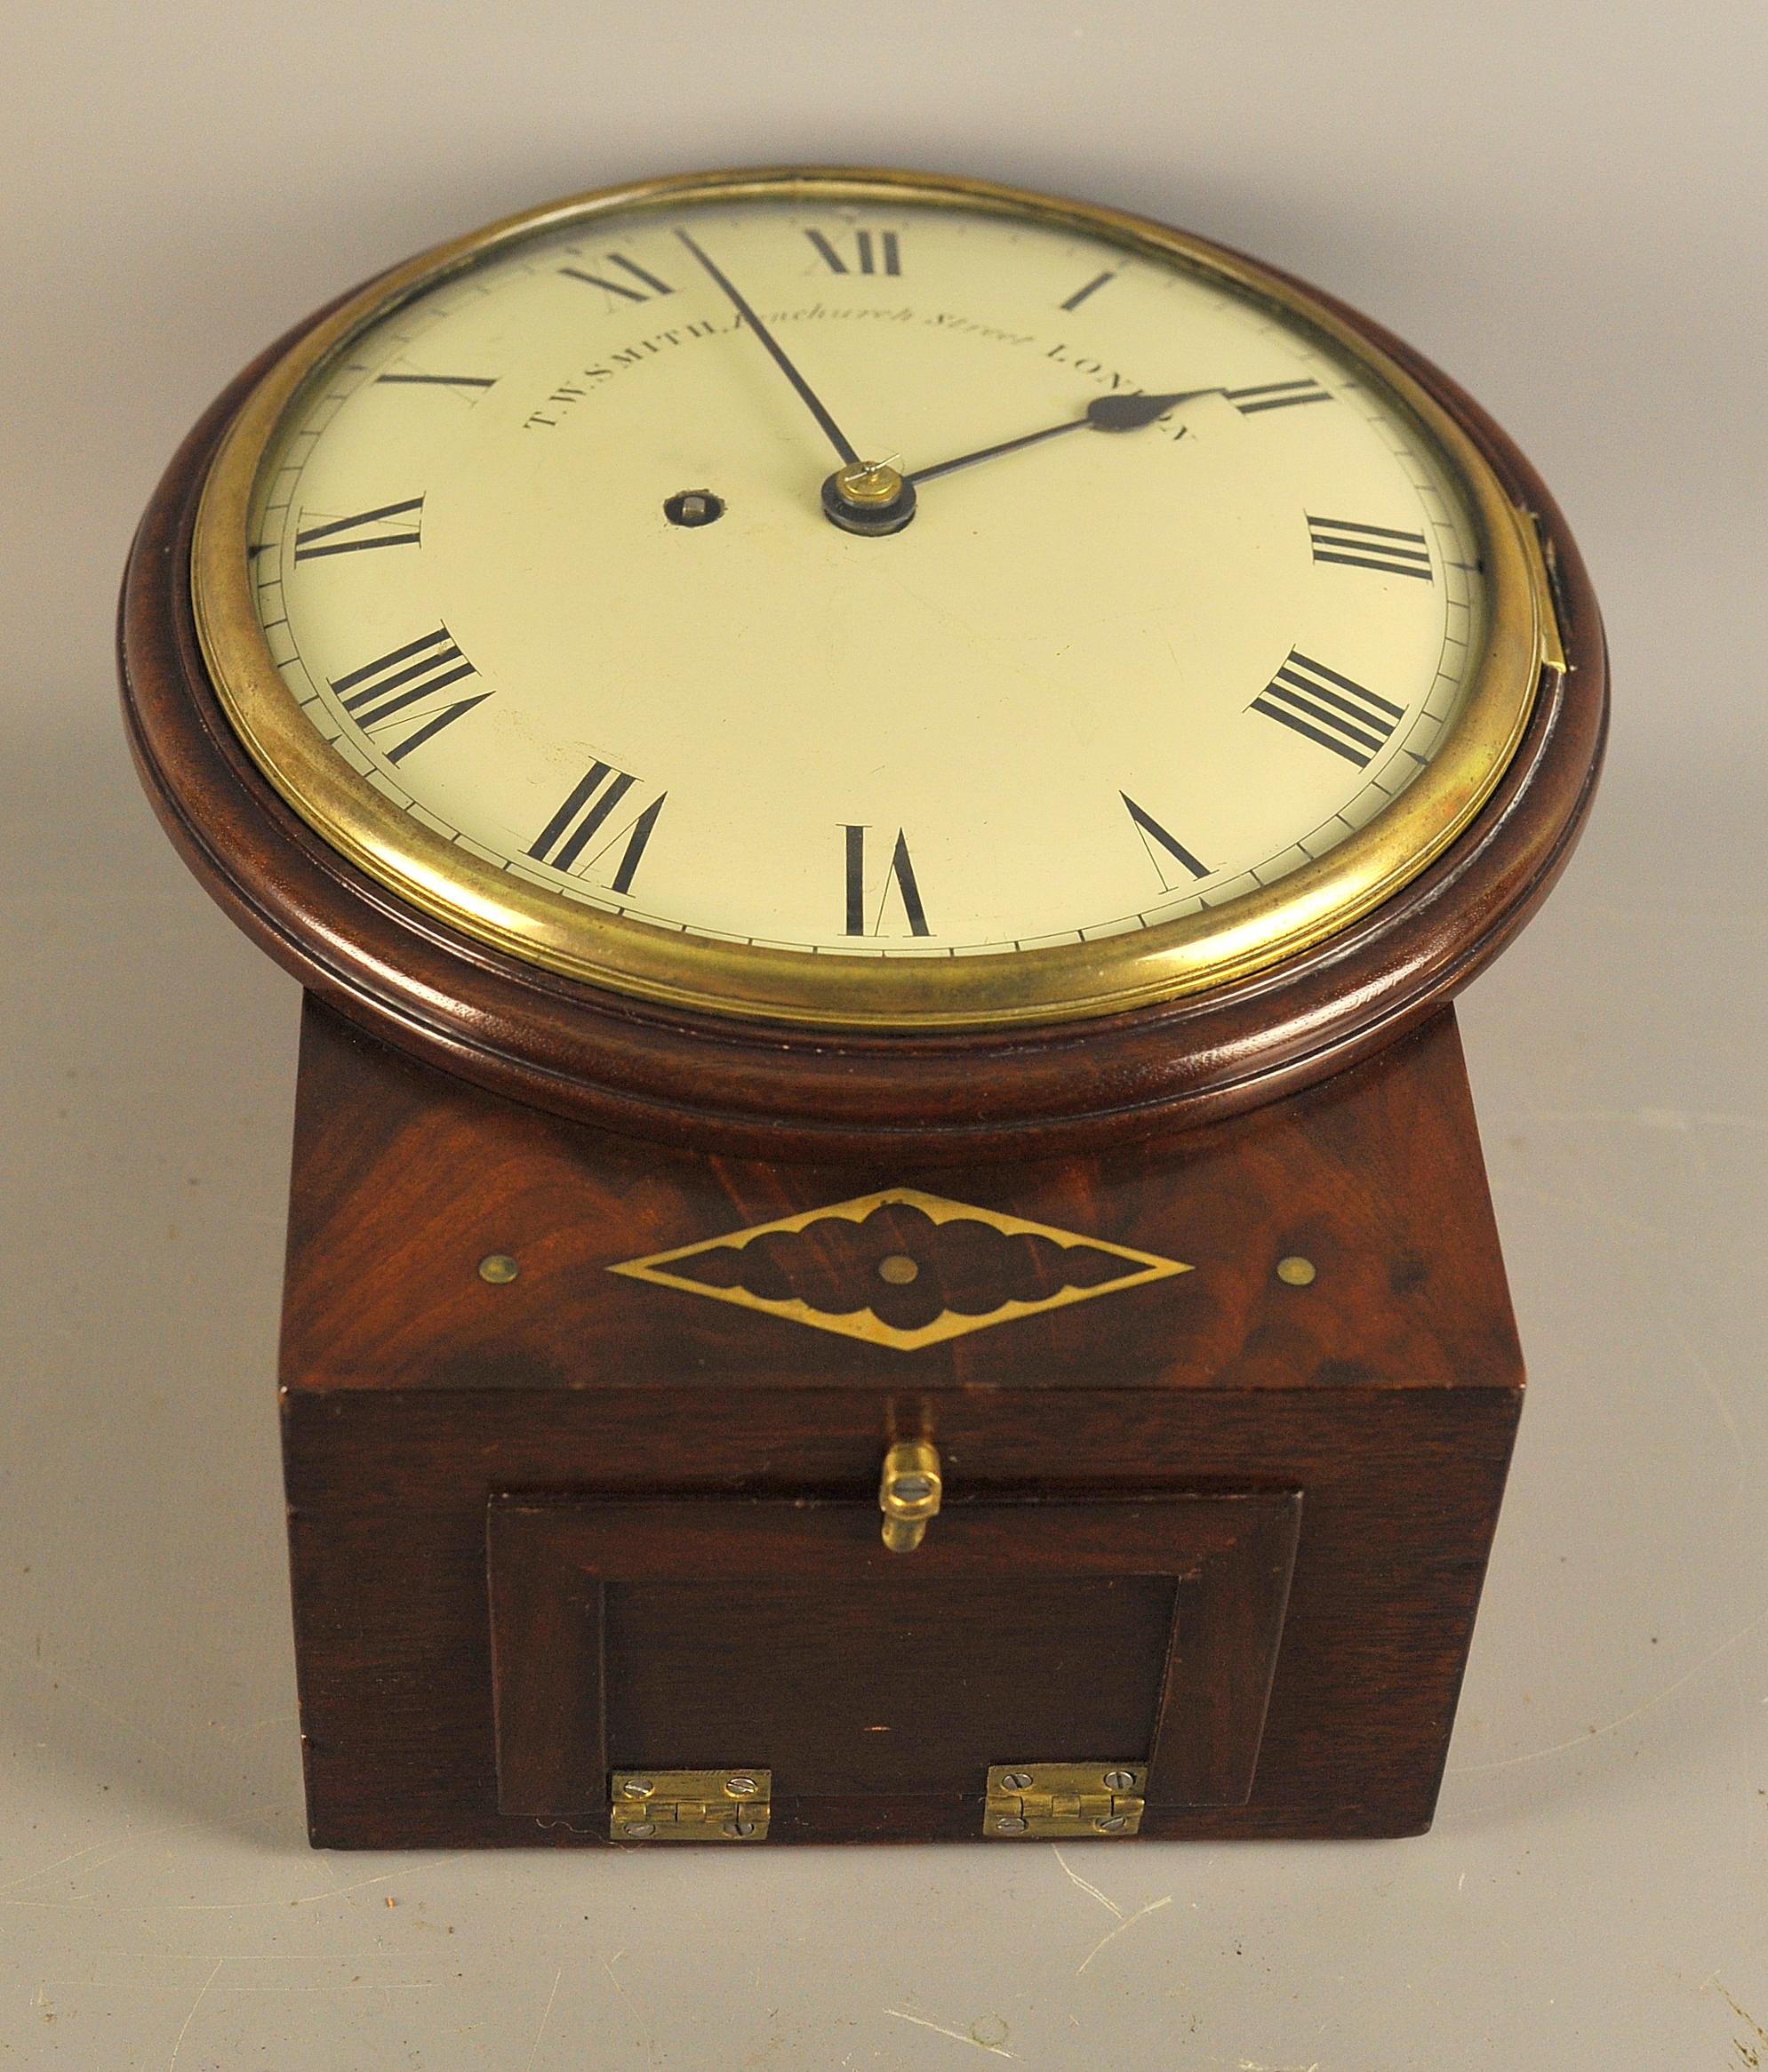 This is a most pleasing English fusee dial clock of small size and excellent quality by T.W. Smith , Fenchurch St , London having been recently sourced from an elderly private client who has owned the clock for many years.
This clock is of elegant